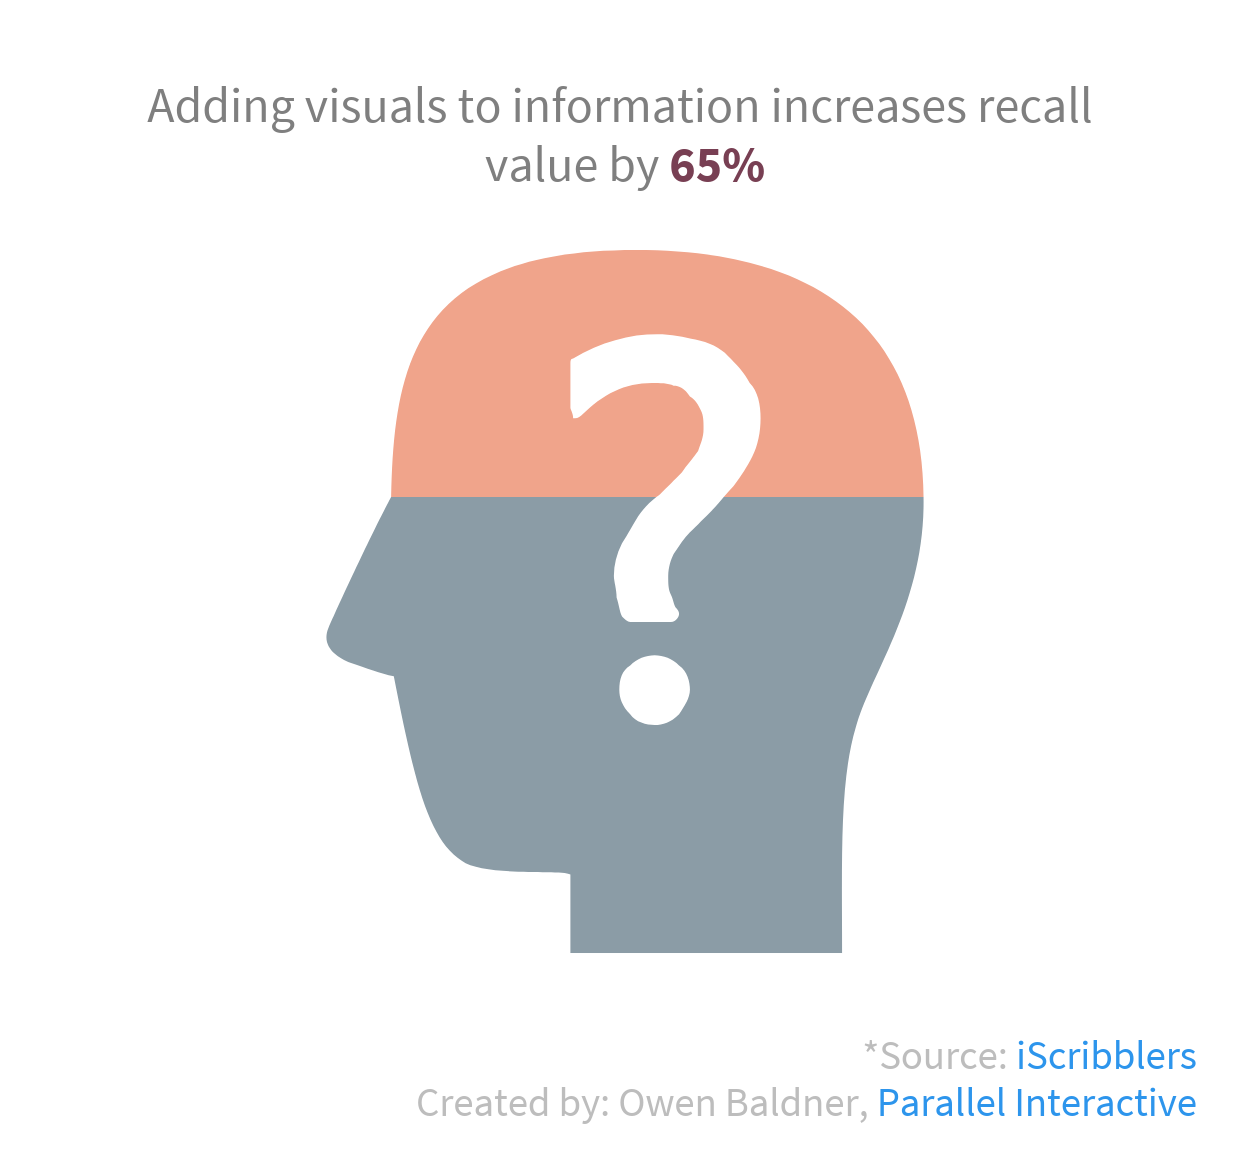 Adding visuals to information increases recall by 65%